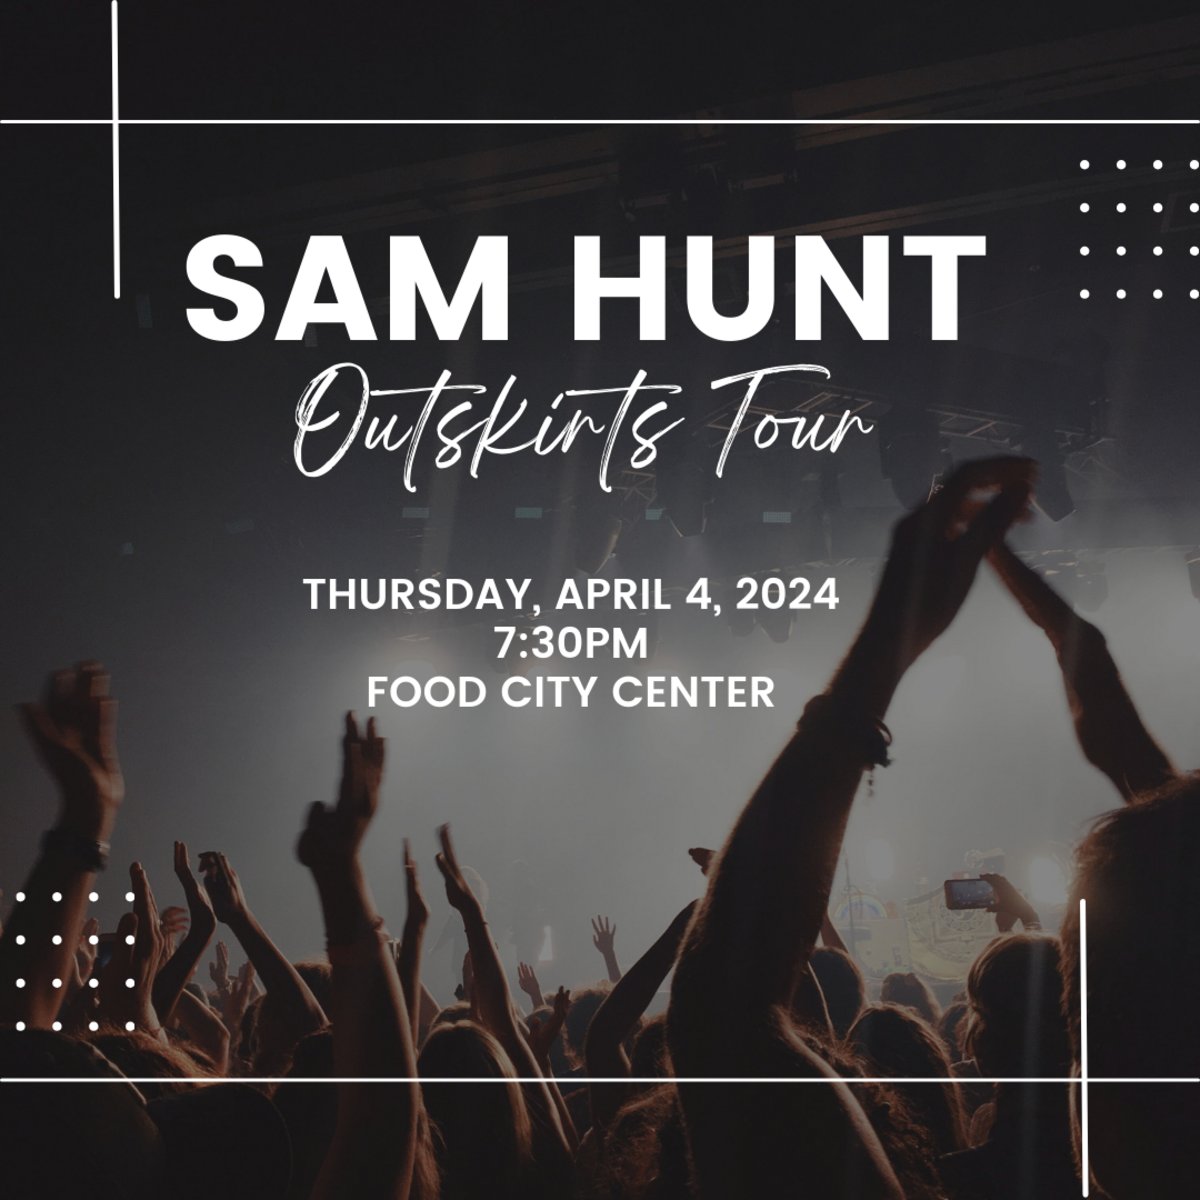 Any plans for this Thursday night? Grab tickets for the #SamHunt: Outskirts Tour at bit.ly/3Vxtkk, coming to #FoodCityCenter on April 4th at 7:30pm. Book rooms with us to kick the weekend off right in #Knoxville!